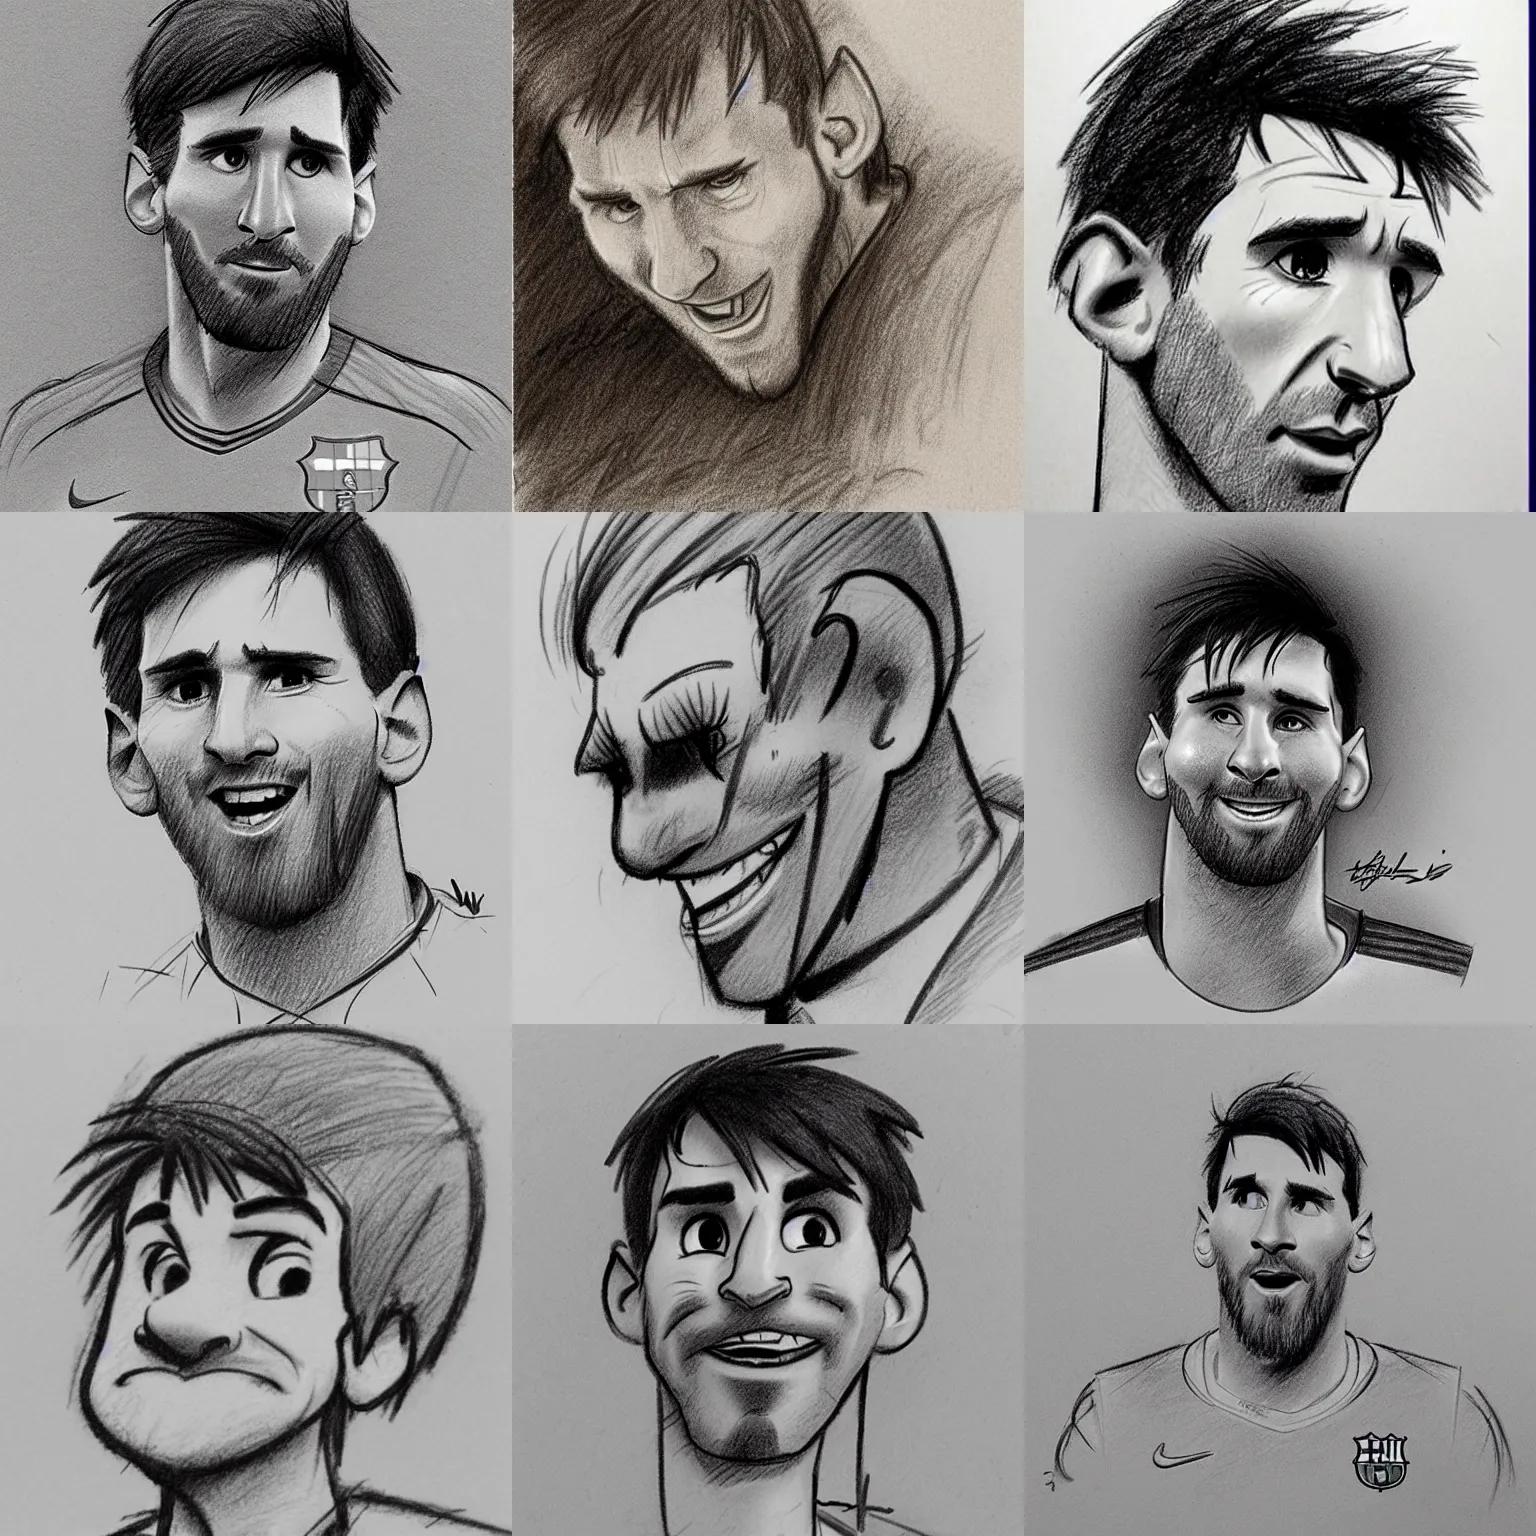 How to Draw Lionel Messi - Step-by-Step Tutorial